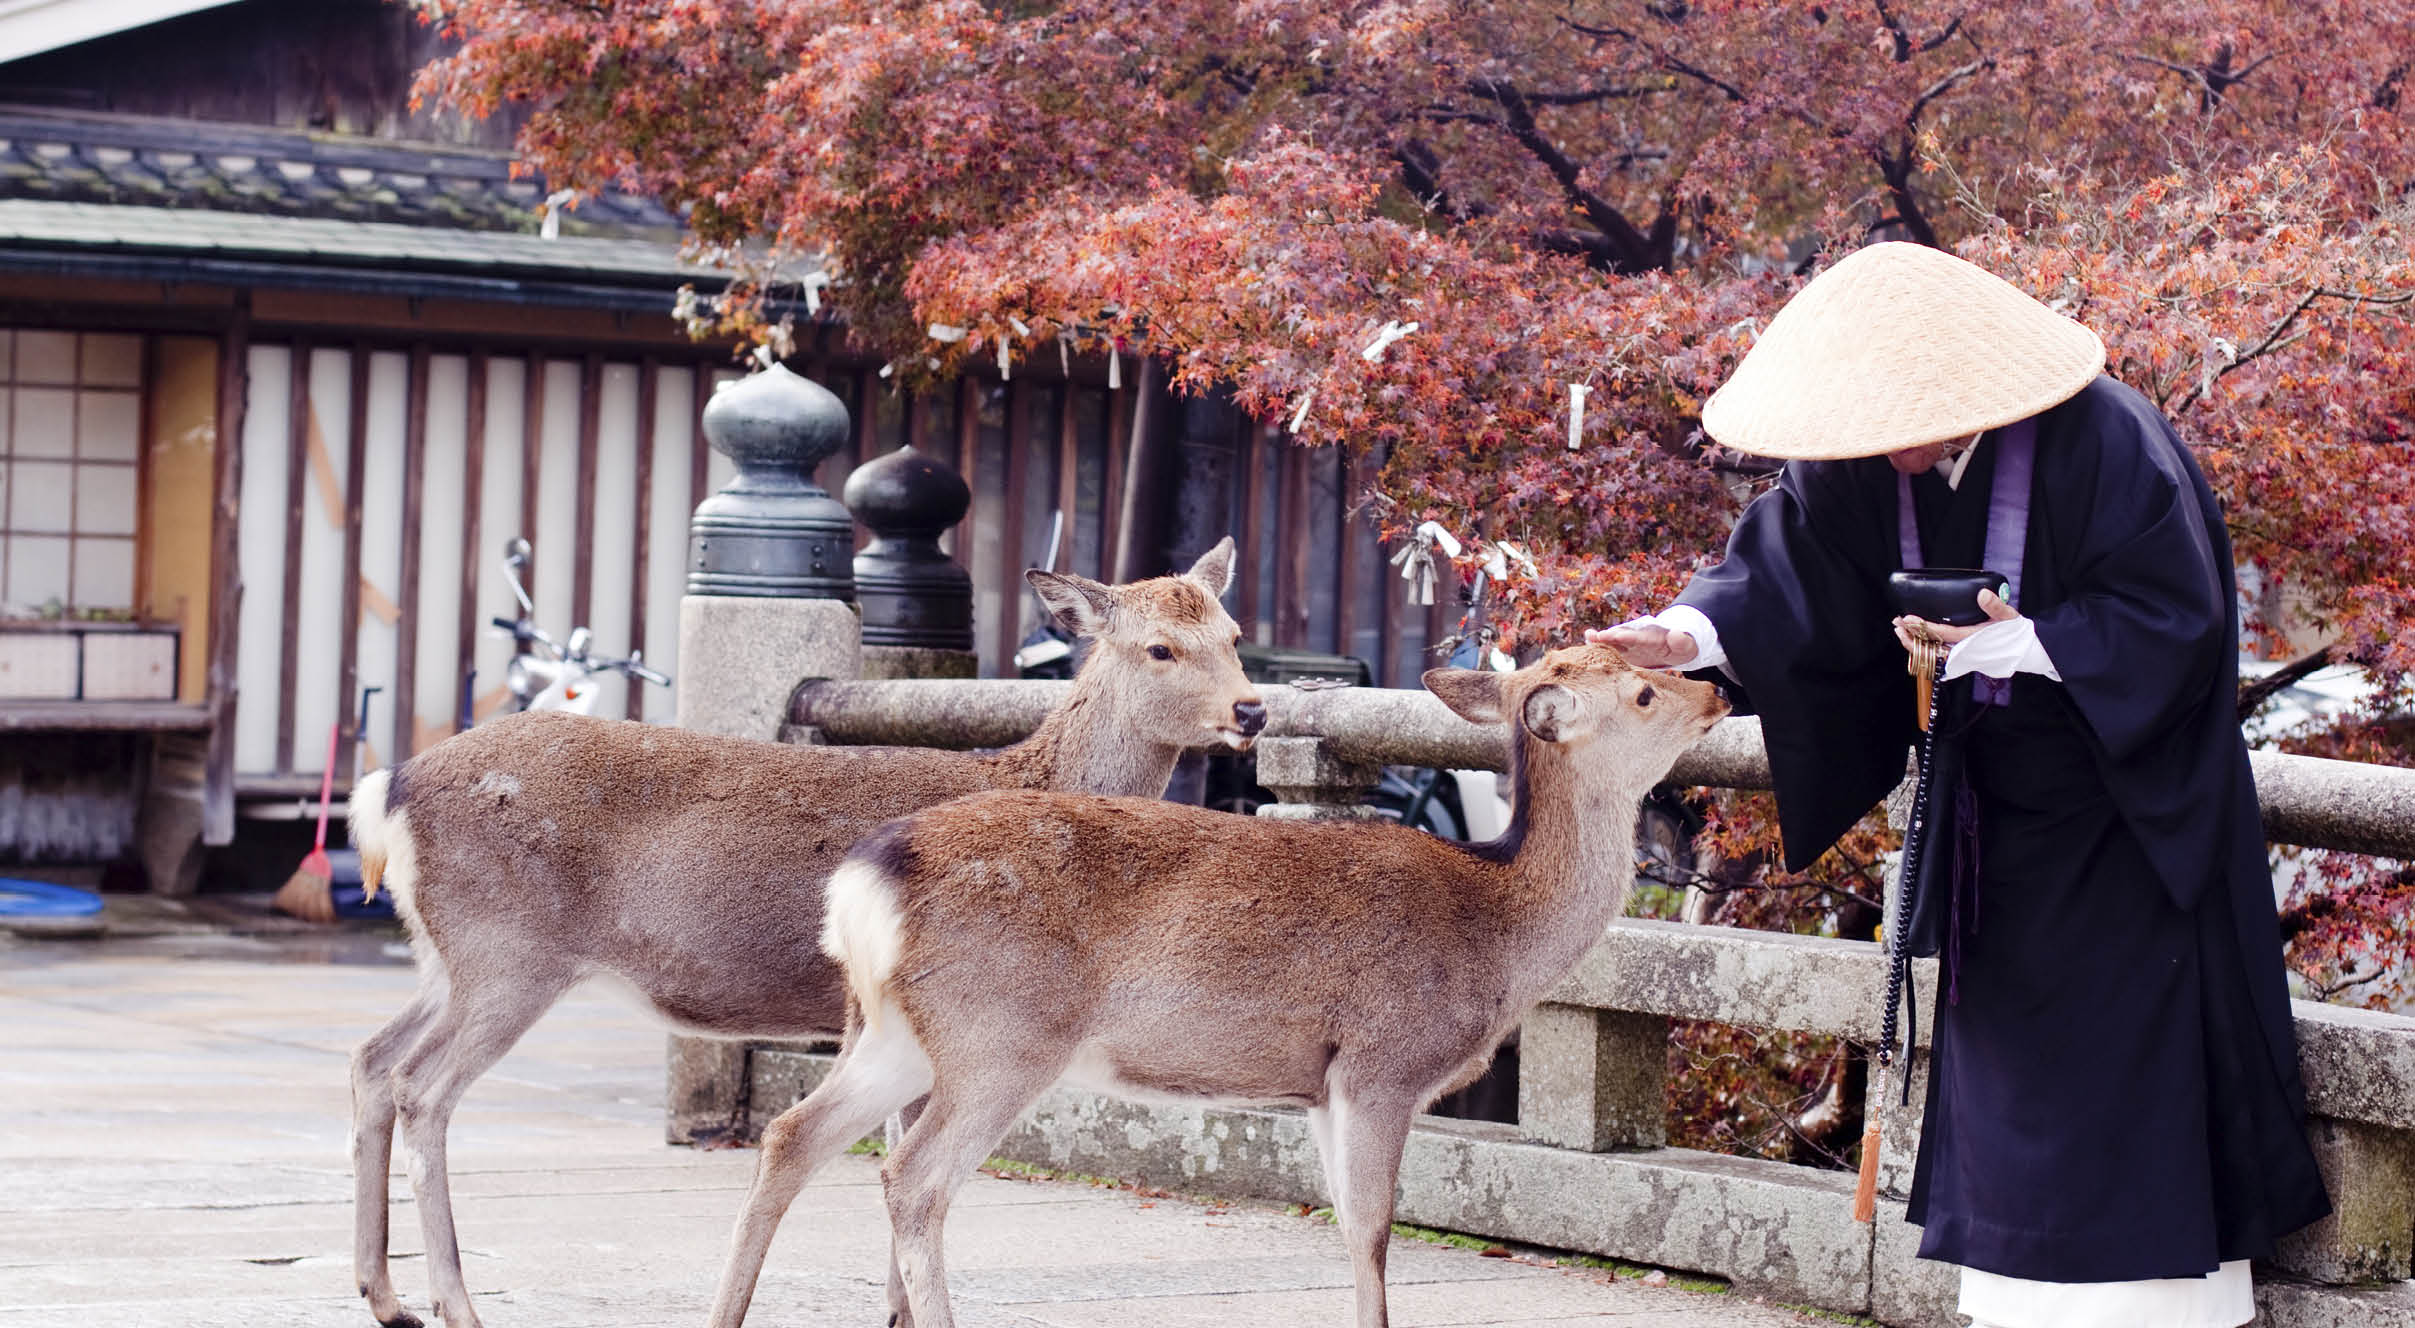 A buddhist monk and two deers in an autumn park 